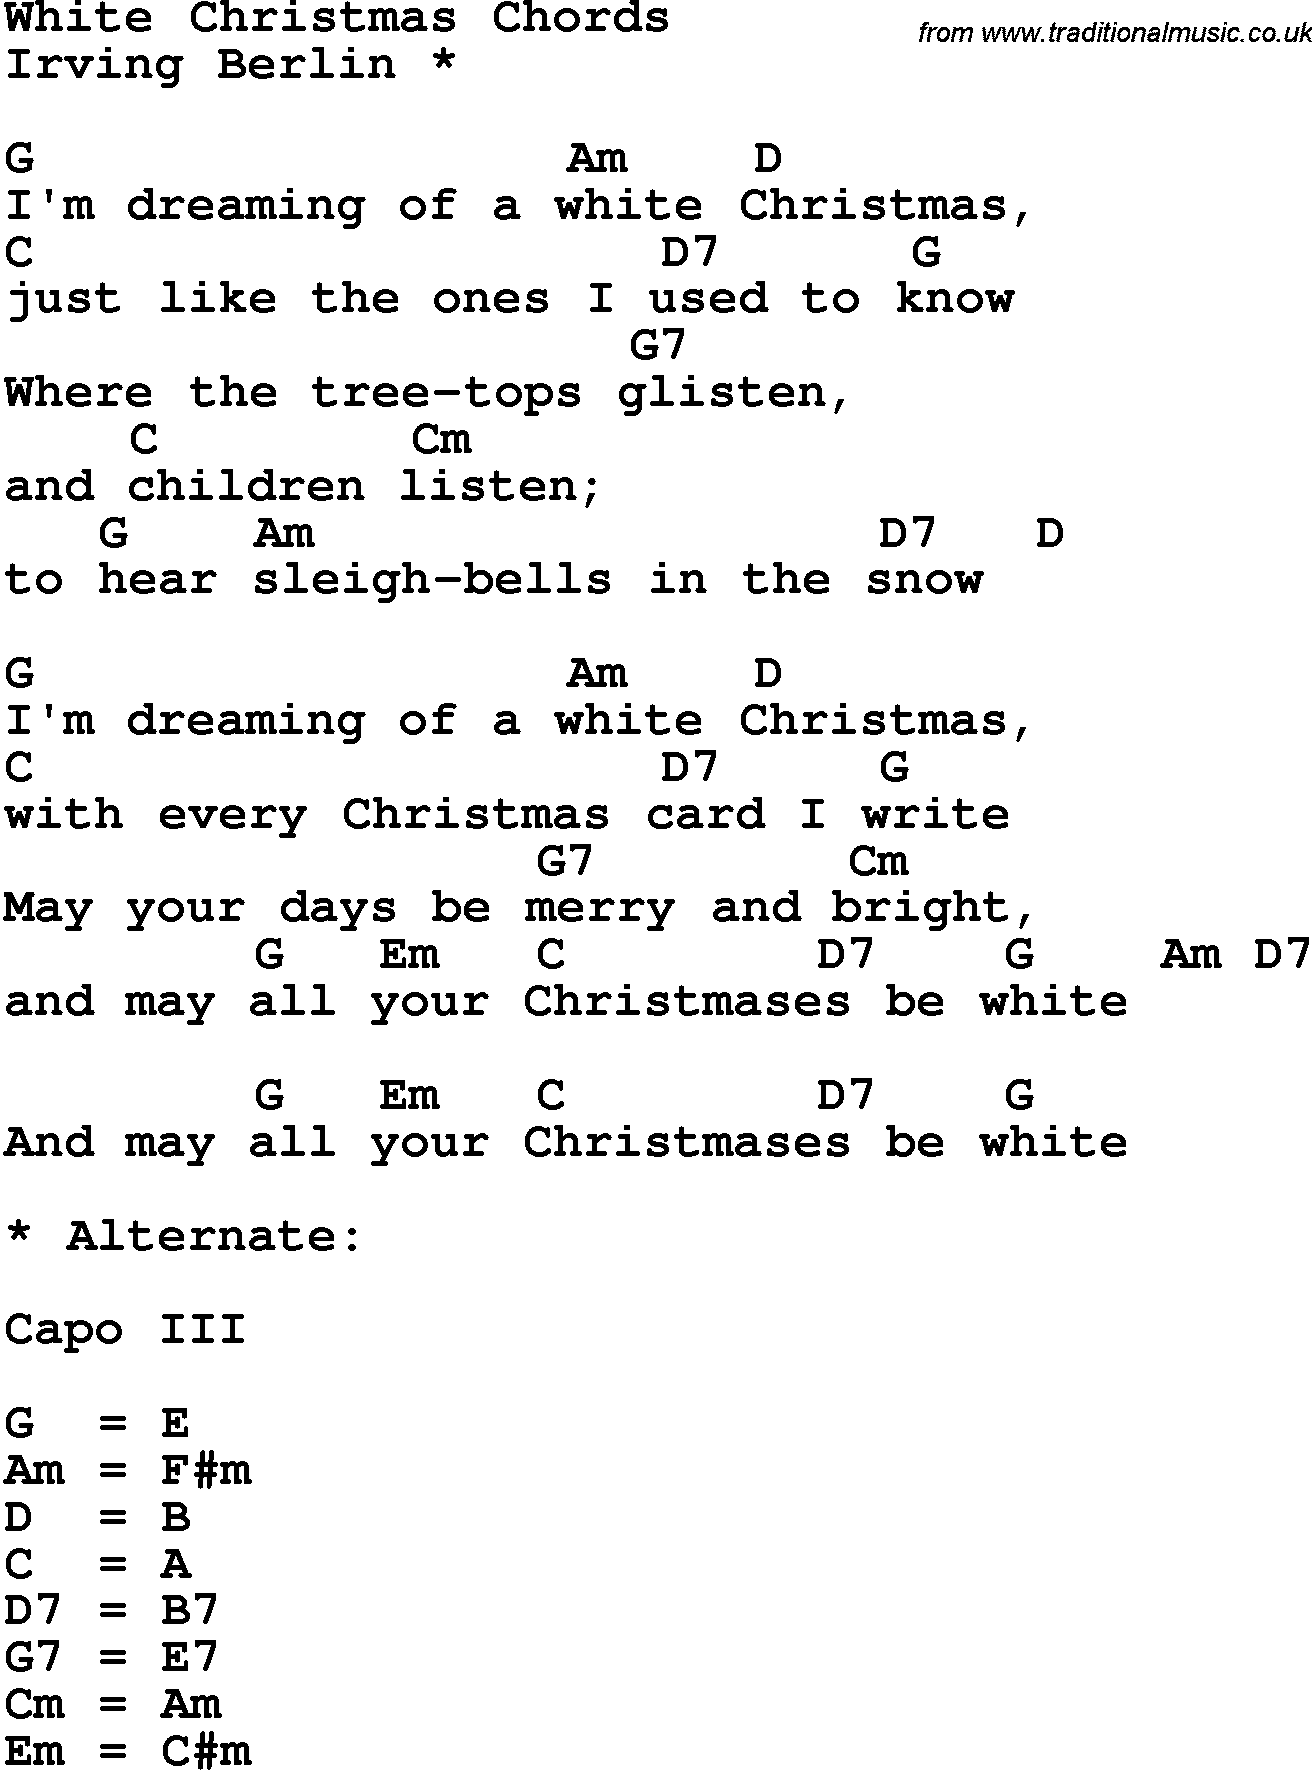 Song Lyrics with guitar chords for White Christmas - Irving Berlin